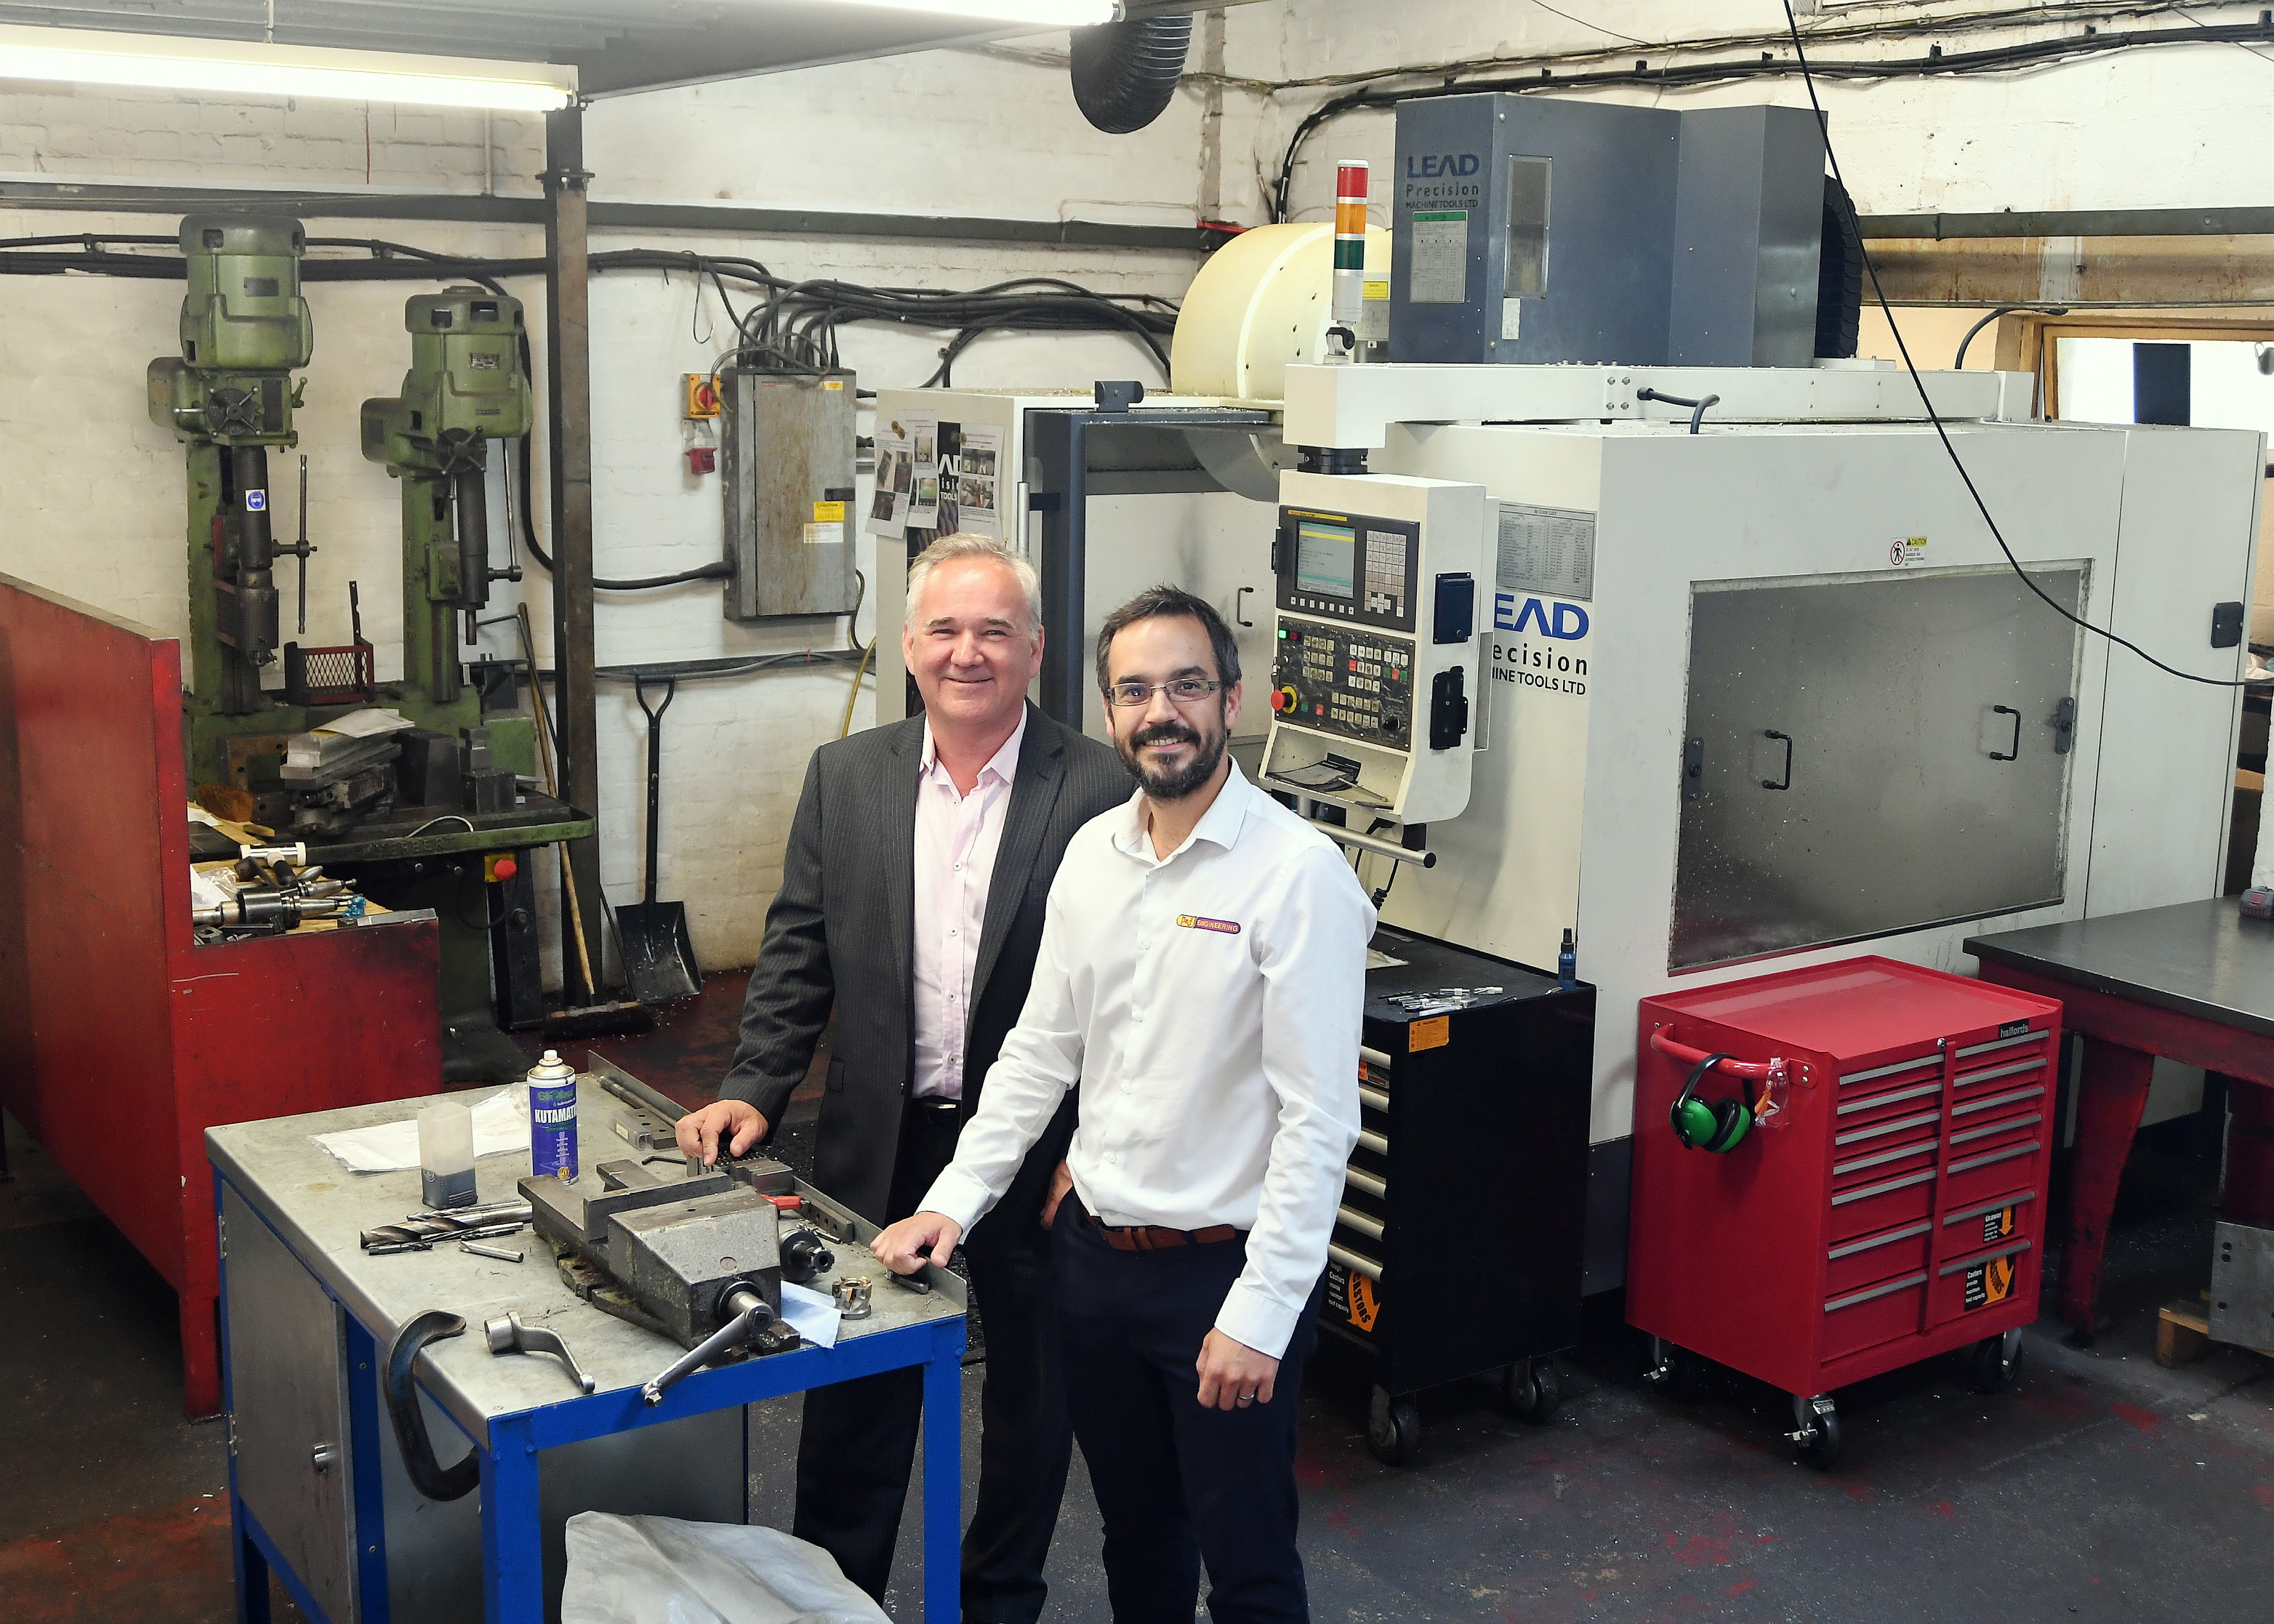 Warwickshire Engineering Firm is Growing after Business Ready Support